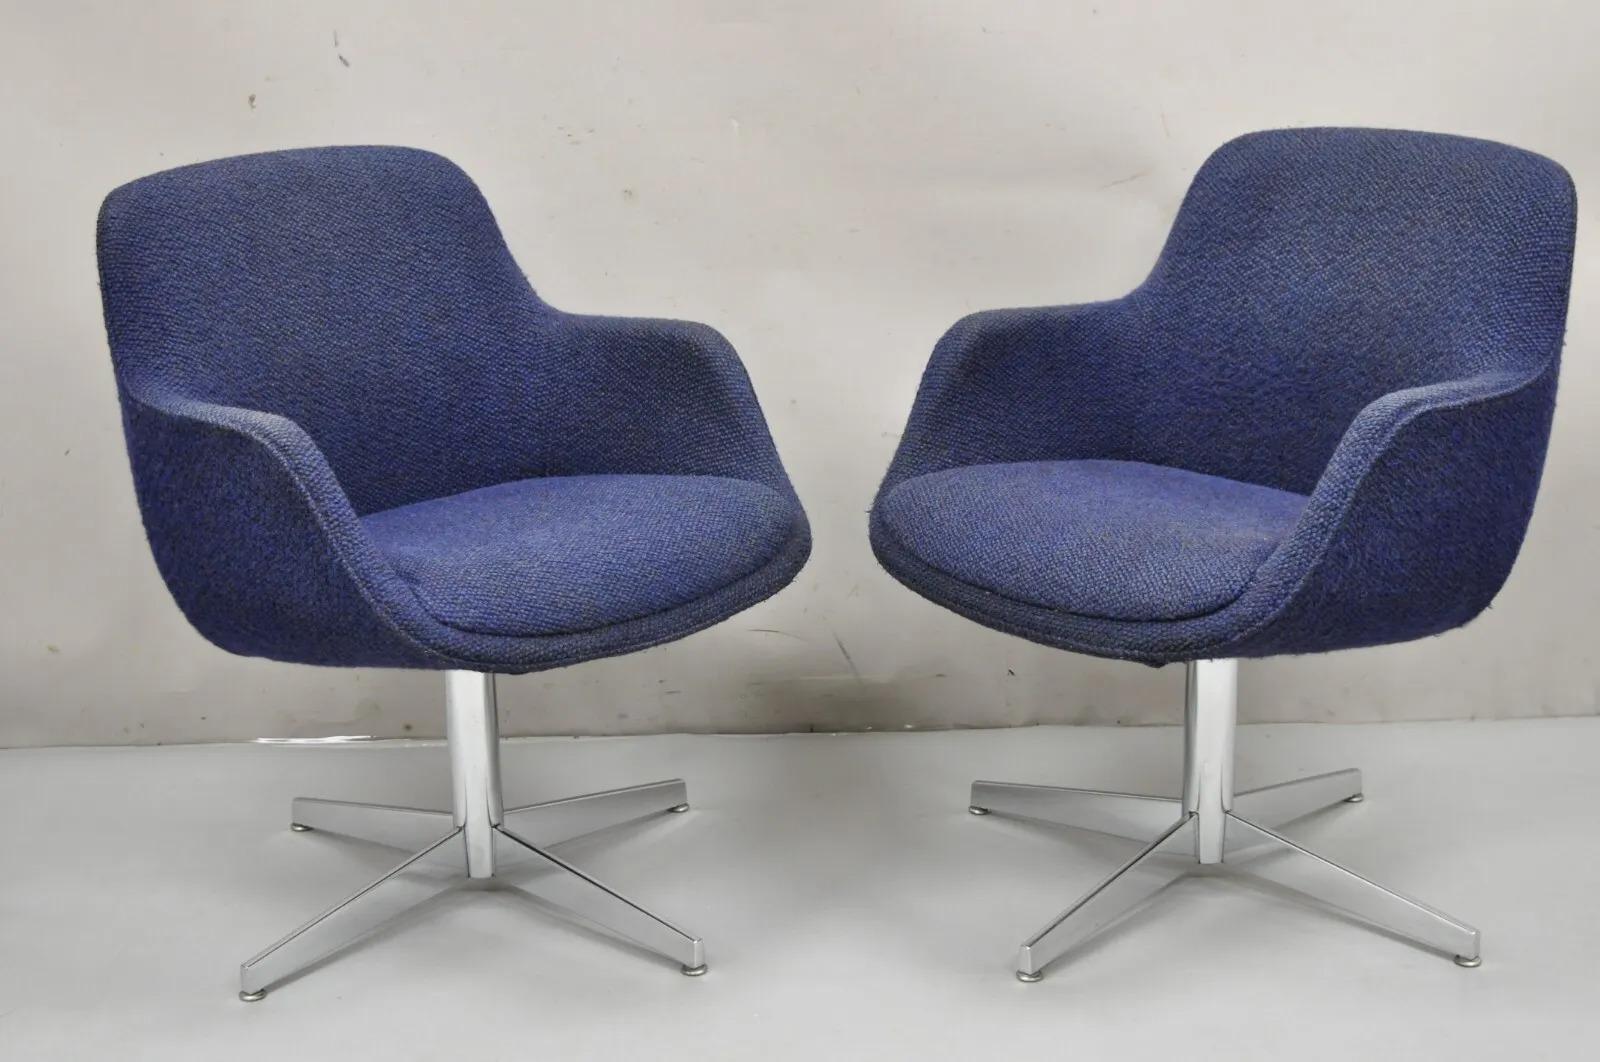 Vintage Mid Century Modern Blue Upholstered Chrome Swivel Base Club Chair - Pair For Sale 6